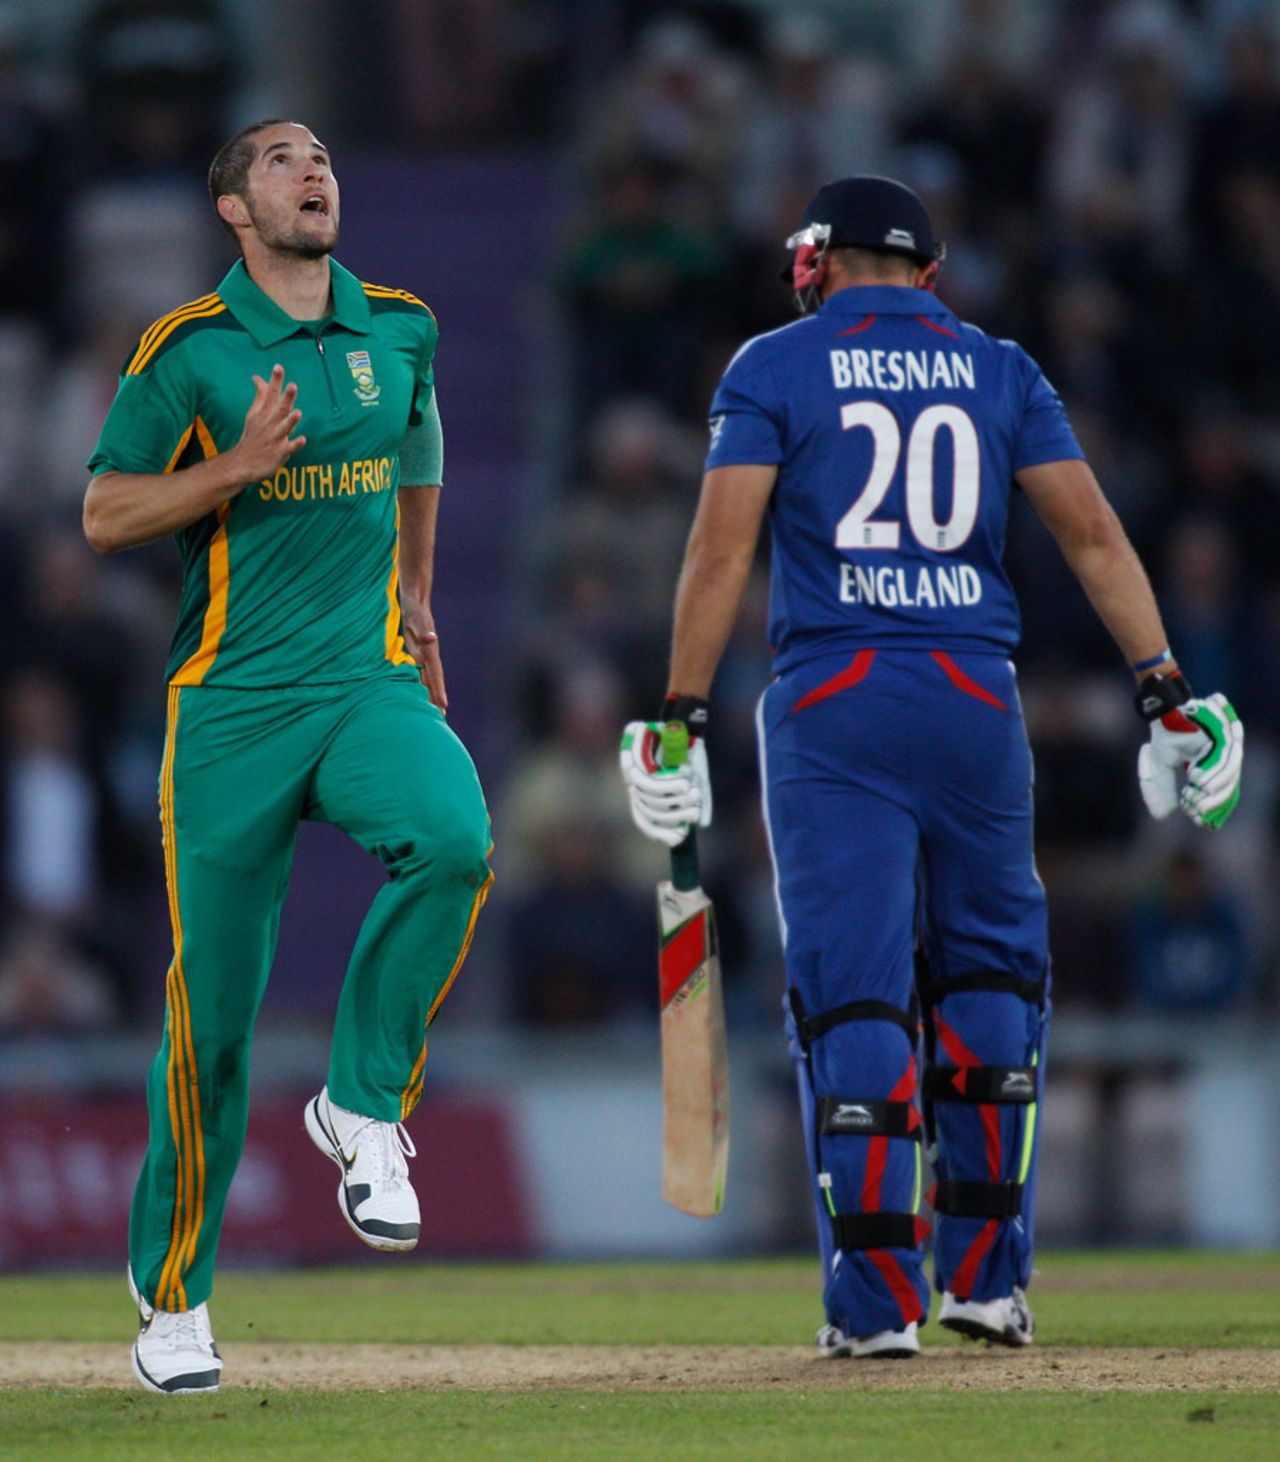 Tim Bresnan was the first of two wickets in an over for Wayne Parnell, England v South Africa, 2nd NatWest ODI, West End, August 28, 2012